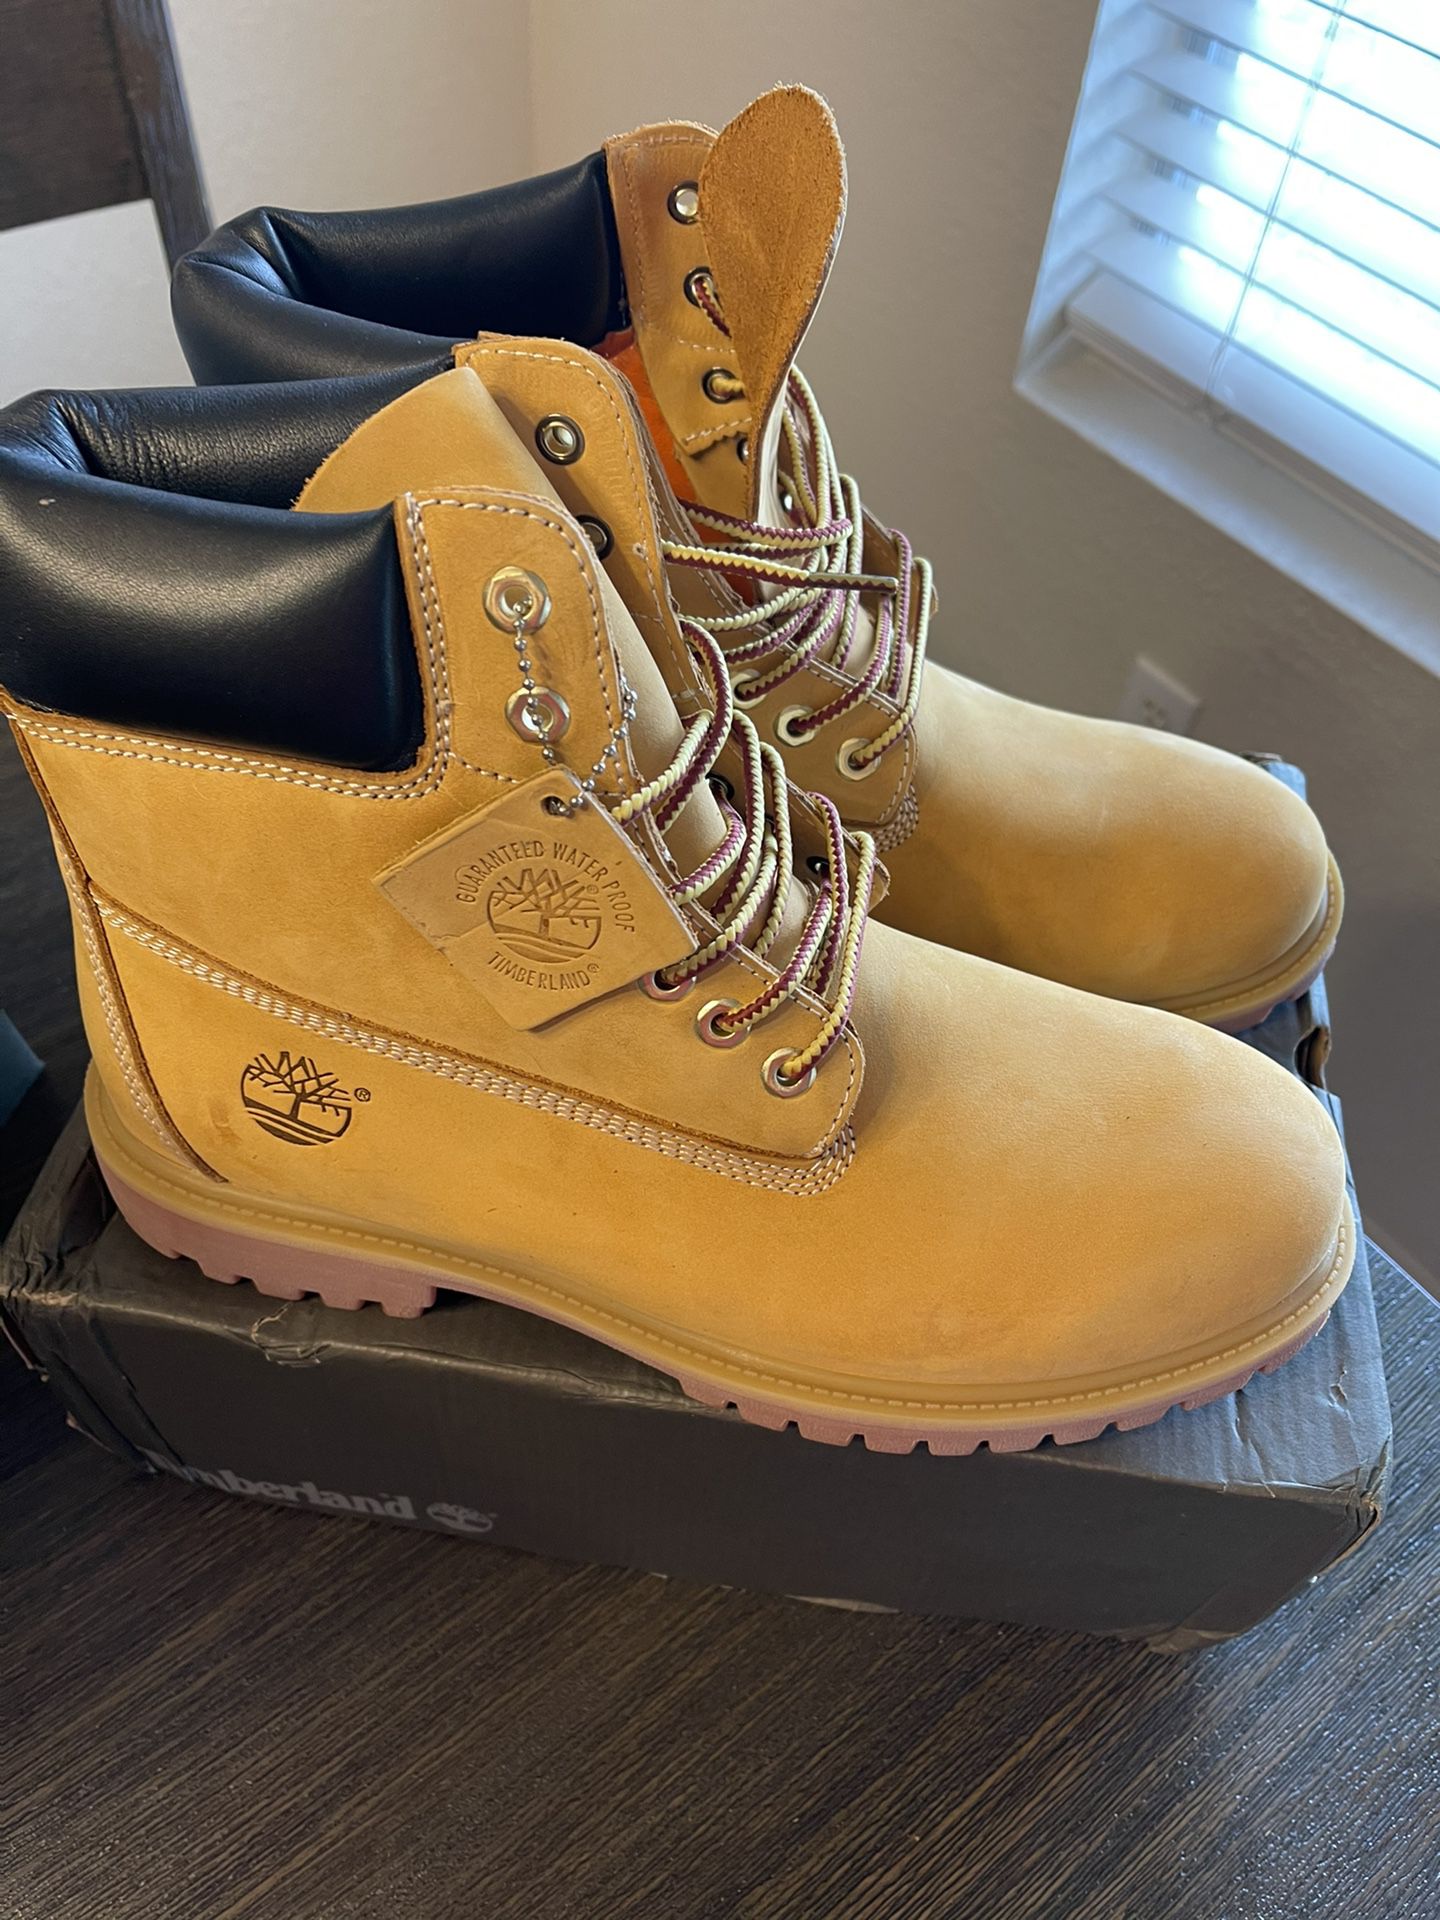 Timberland Boots Size 12 Mans